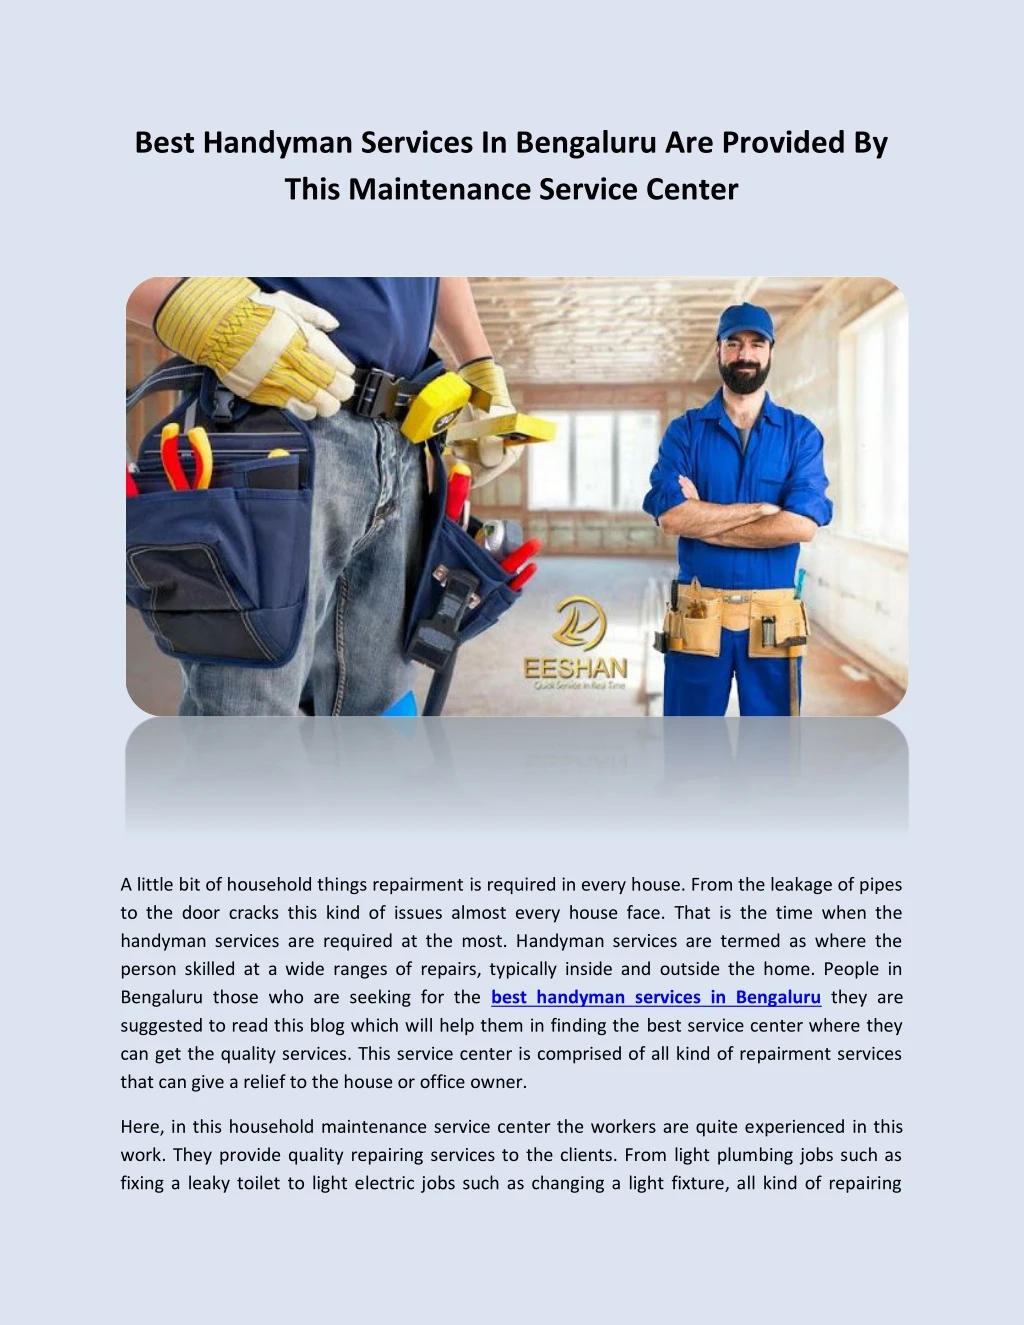 best handyman services in bengaluru are provided